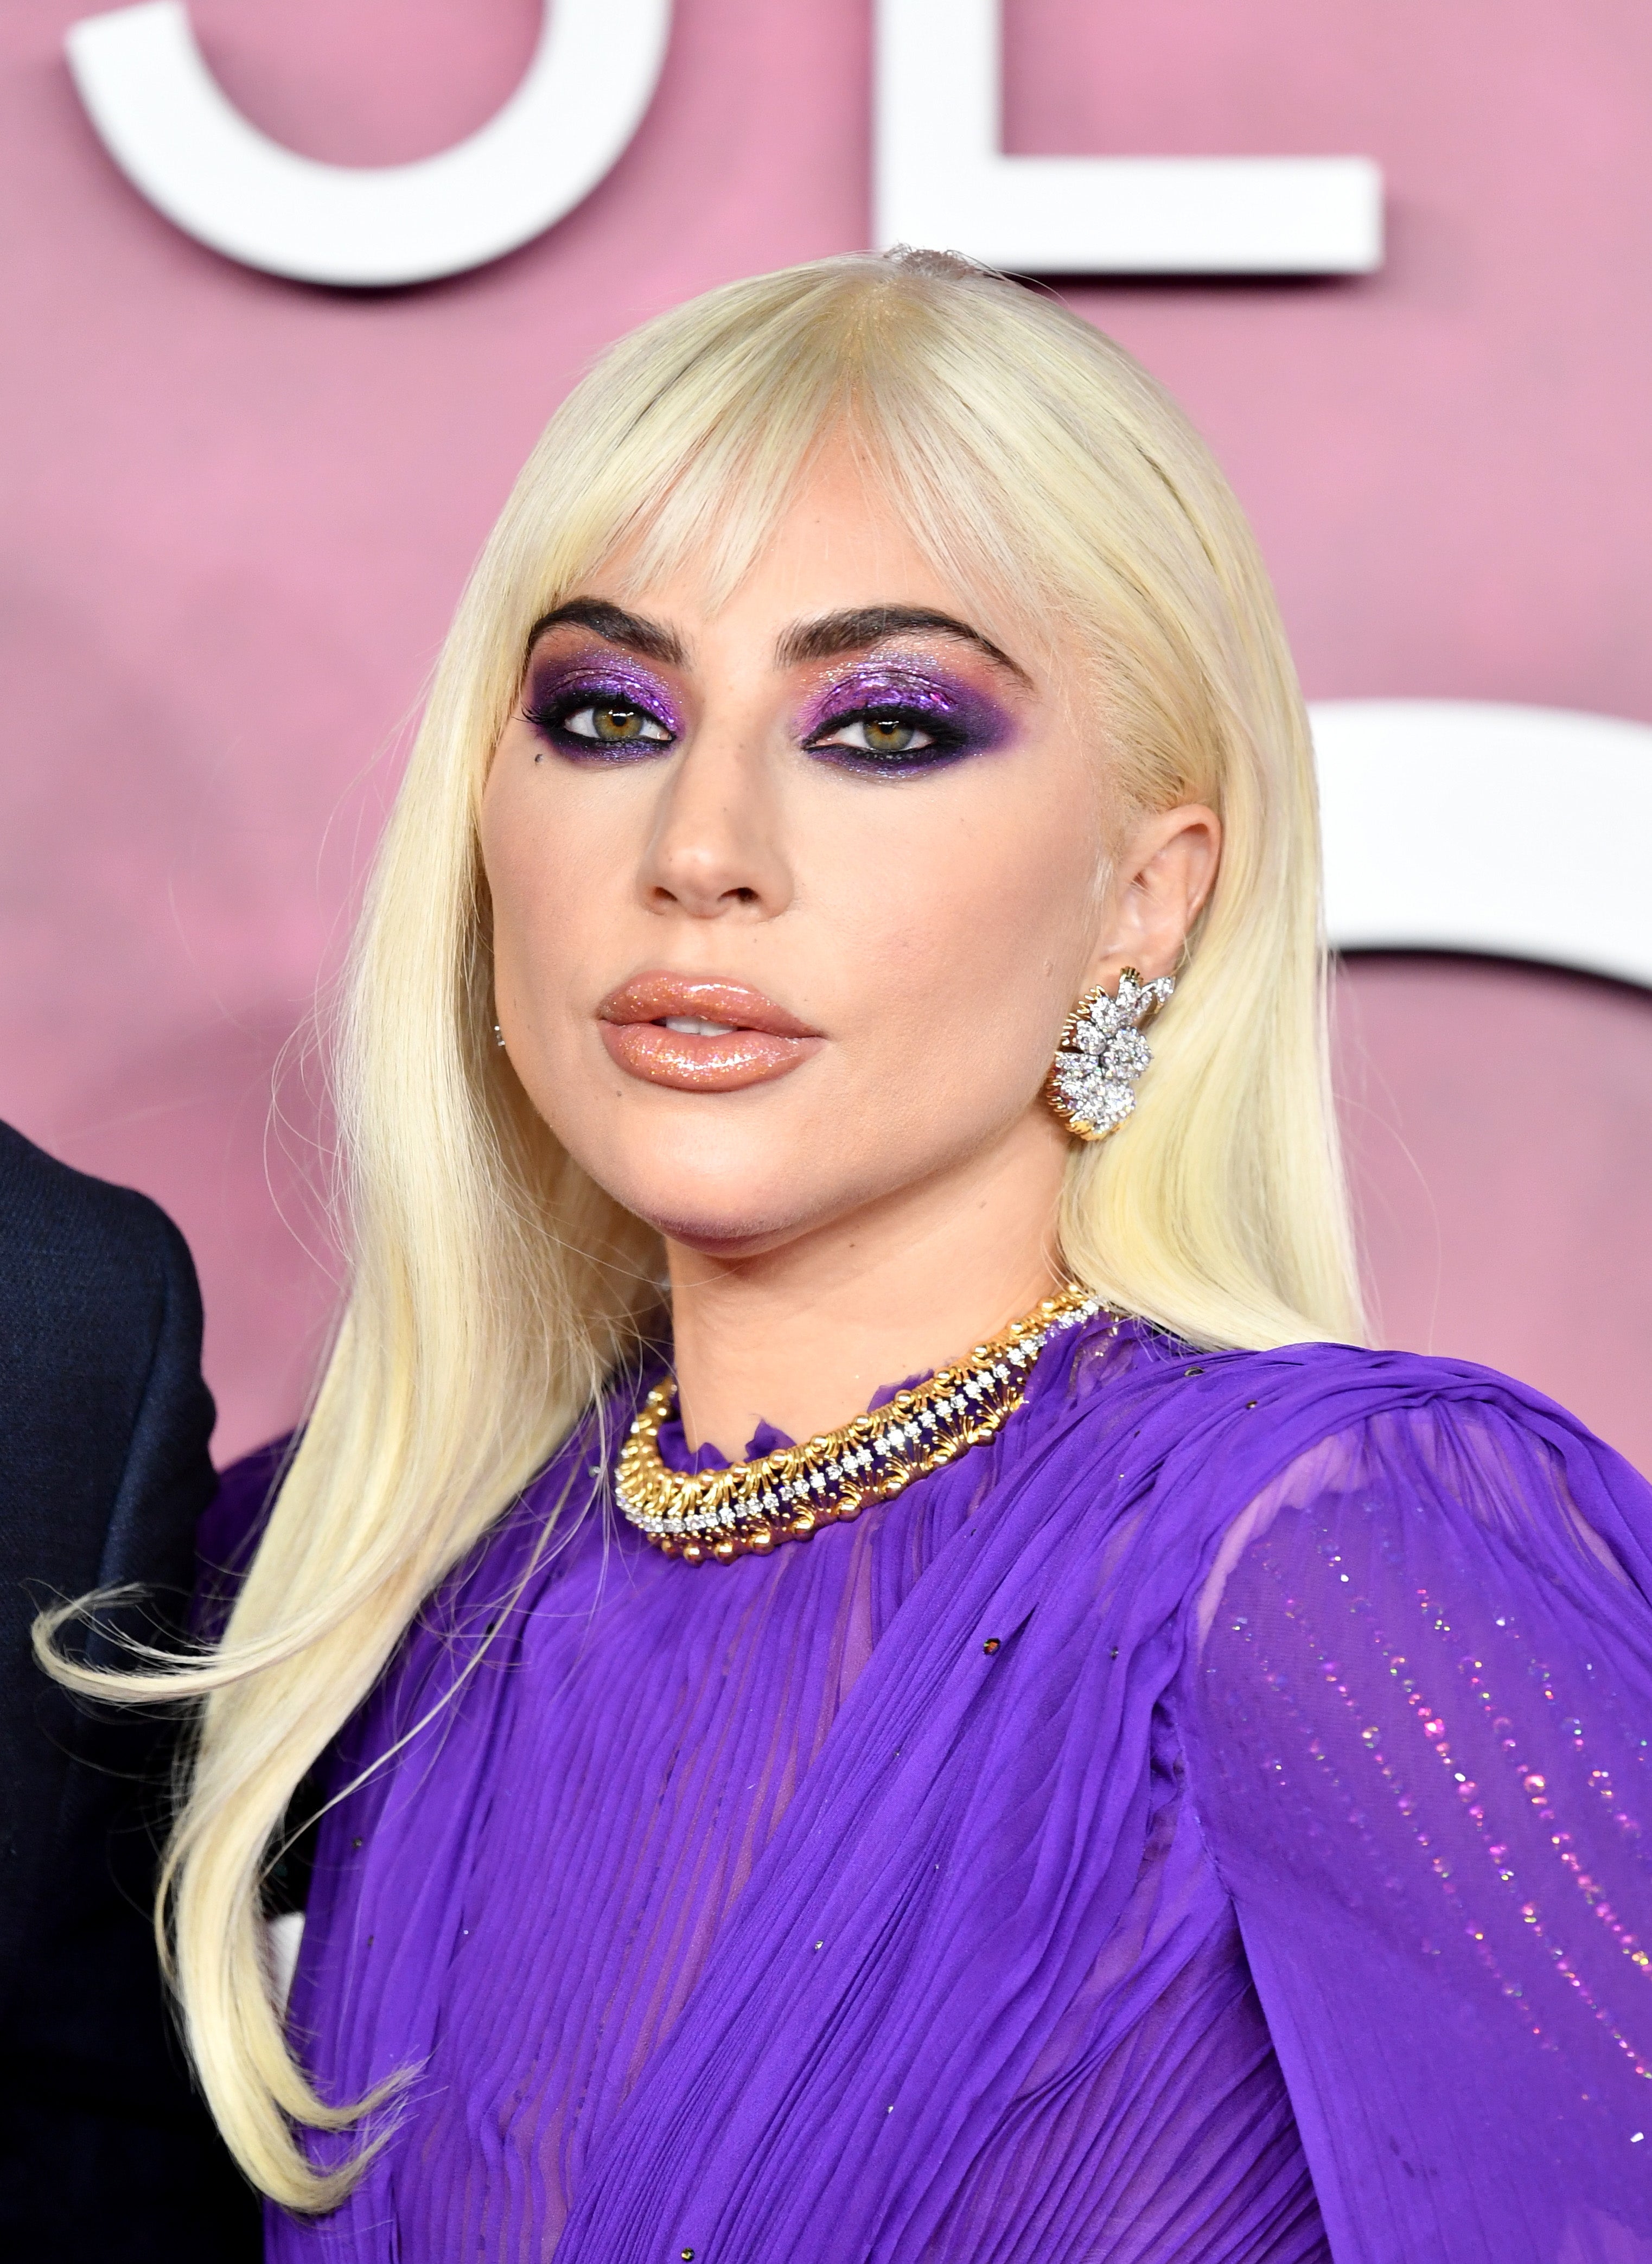 Lady Gaga wears a bold purple eye look at the House of Gucci premiere